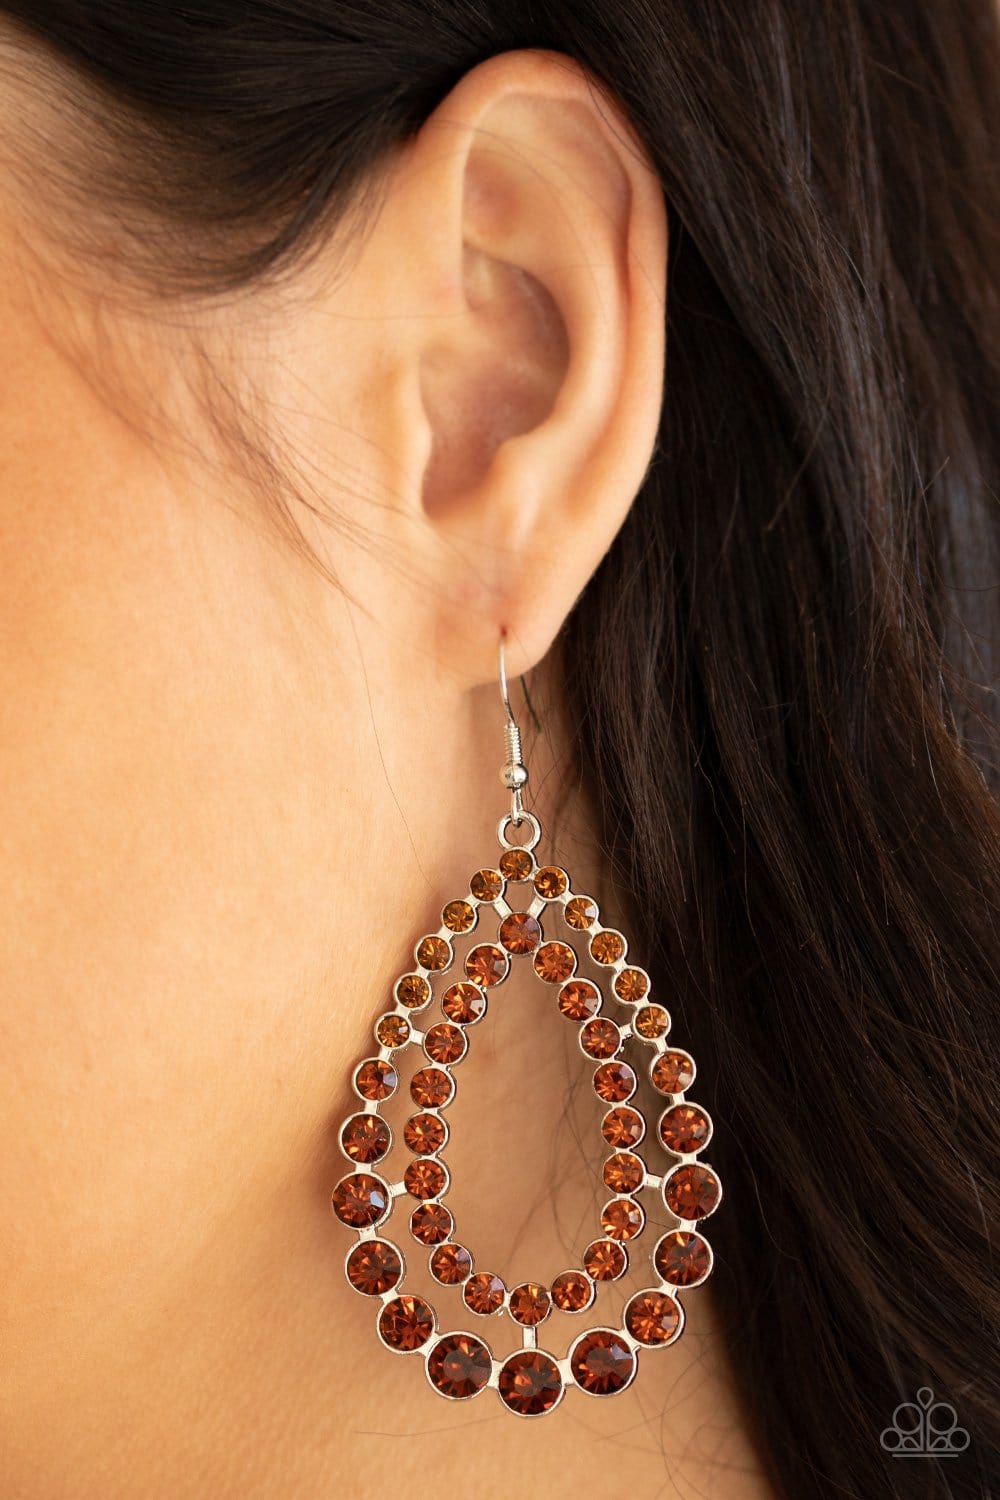 Paparazzi Accessories: Glacial Glaze - Brown/Topaz Rhinestone Earrings - Jewels N Thingz Boutique